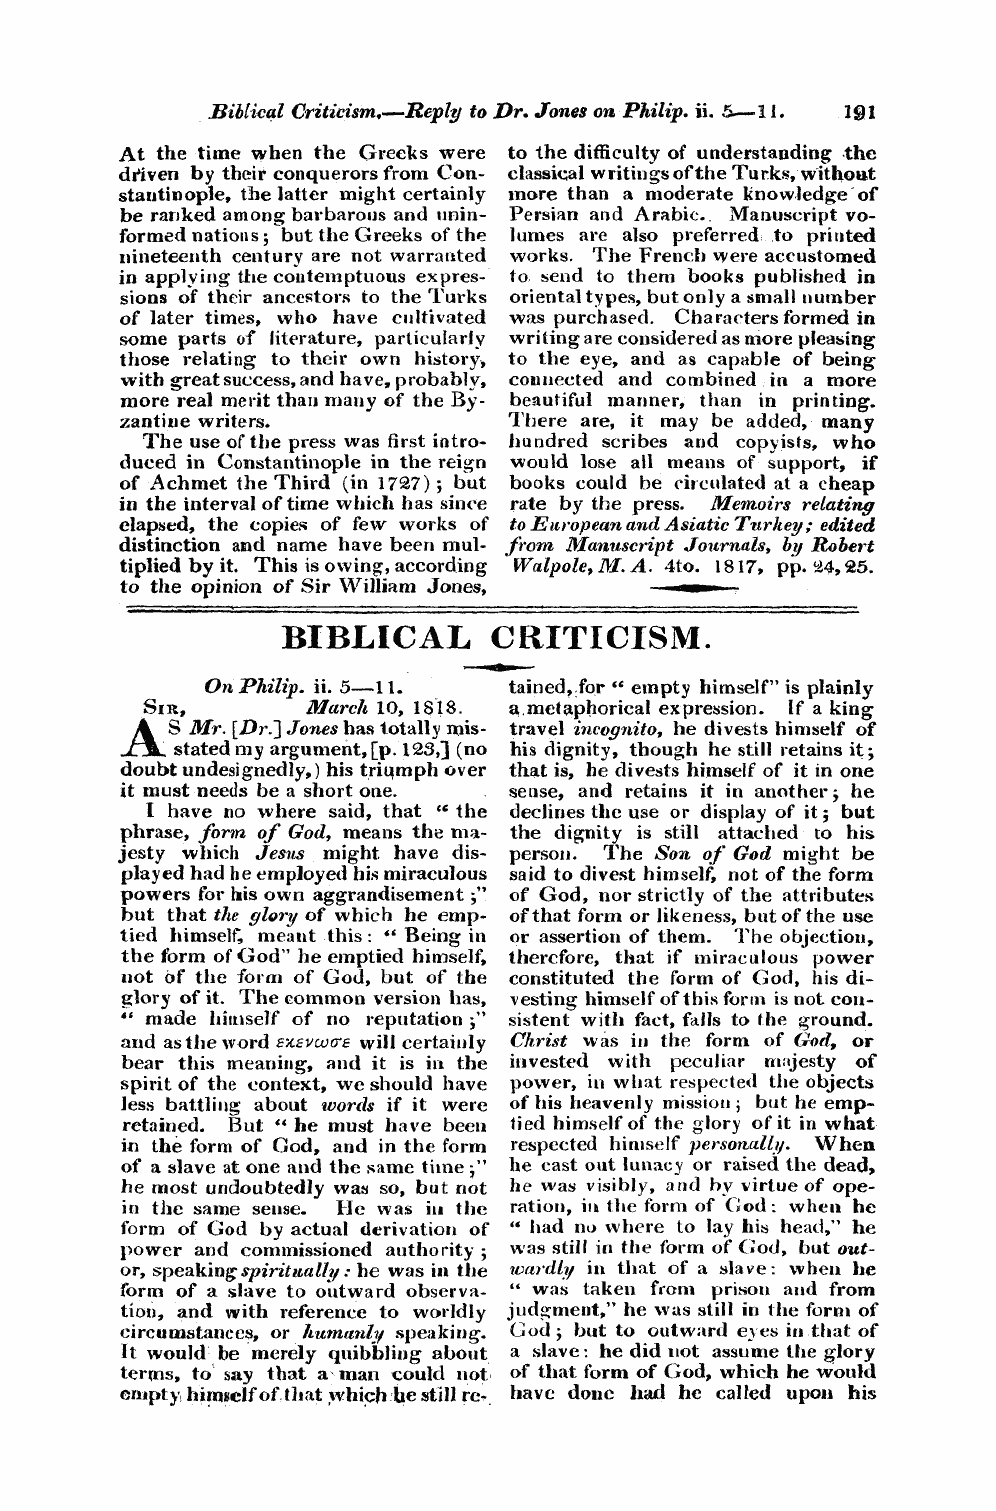 Monthly Repository (1806-1838) and Unitarian Chronicle (1832-1833): F Y, 1st edition - Biblical Criticism.